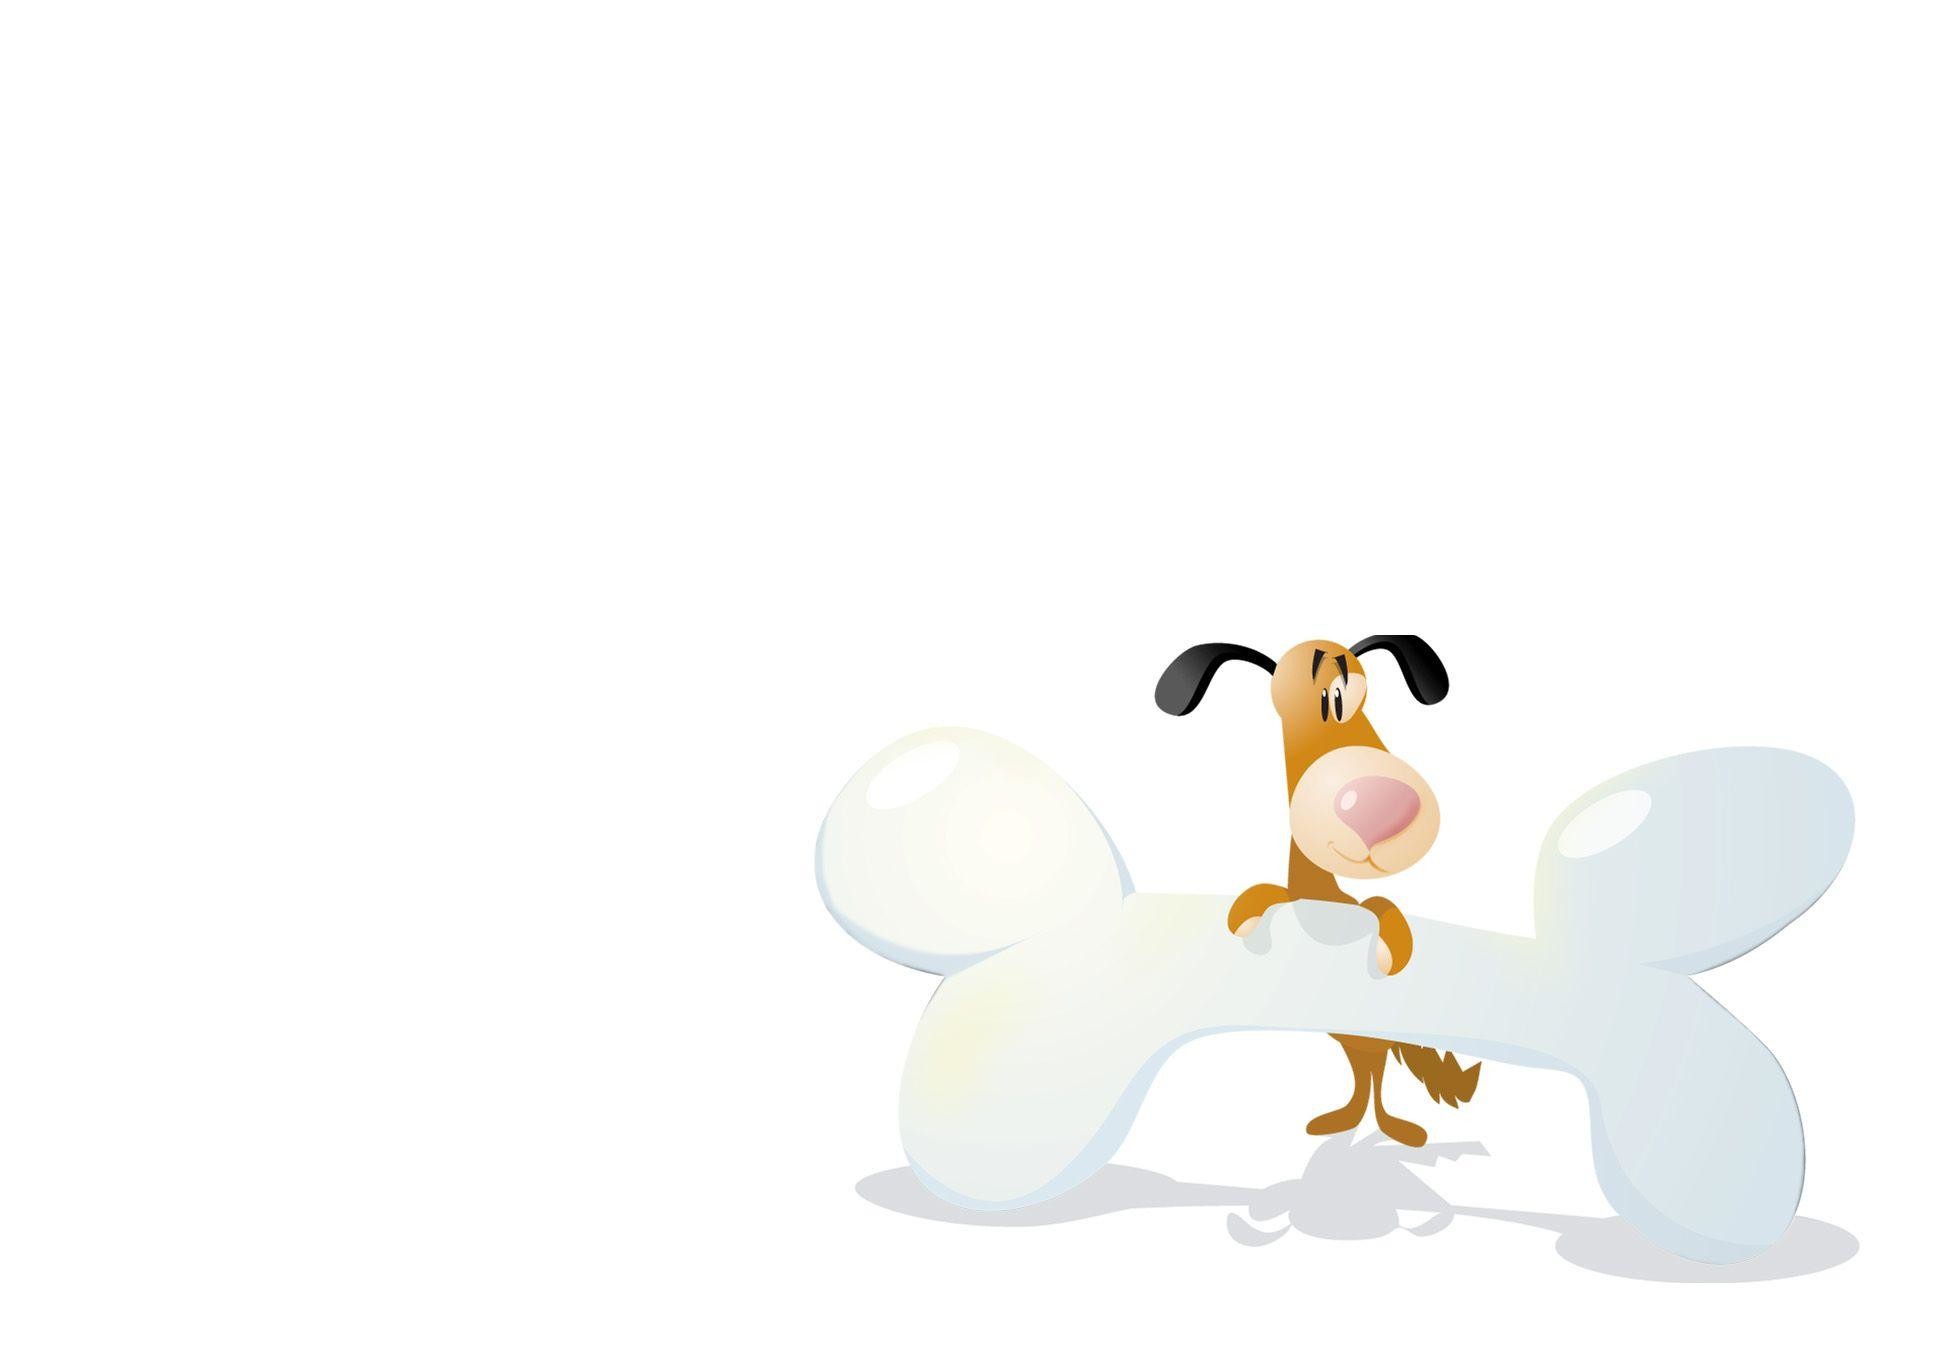 1950x1350 Cartoon Dog With Bone – animals wallpaper image with dogs | Tumblr .